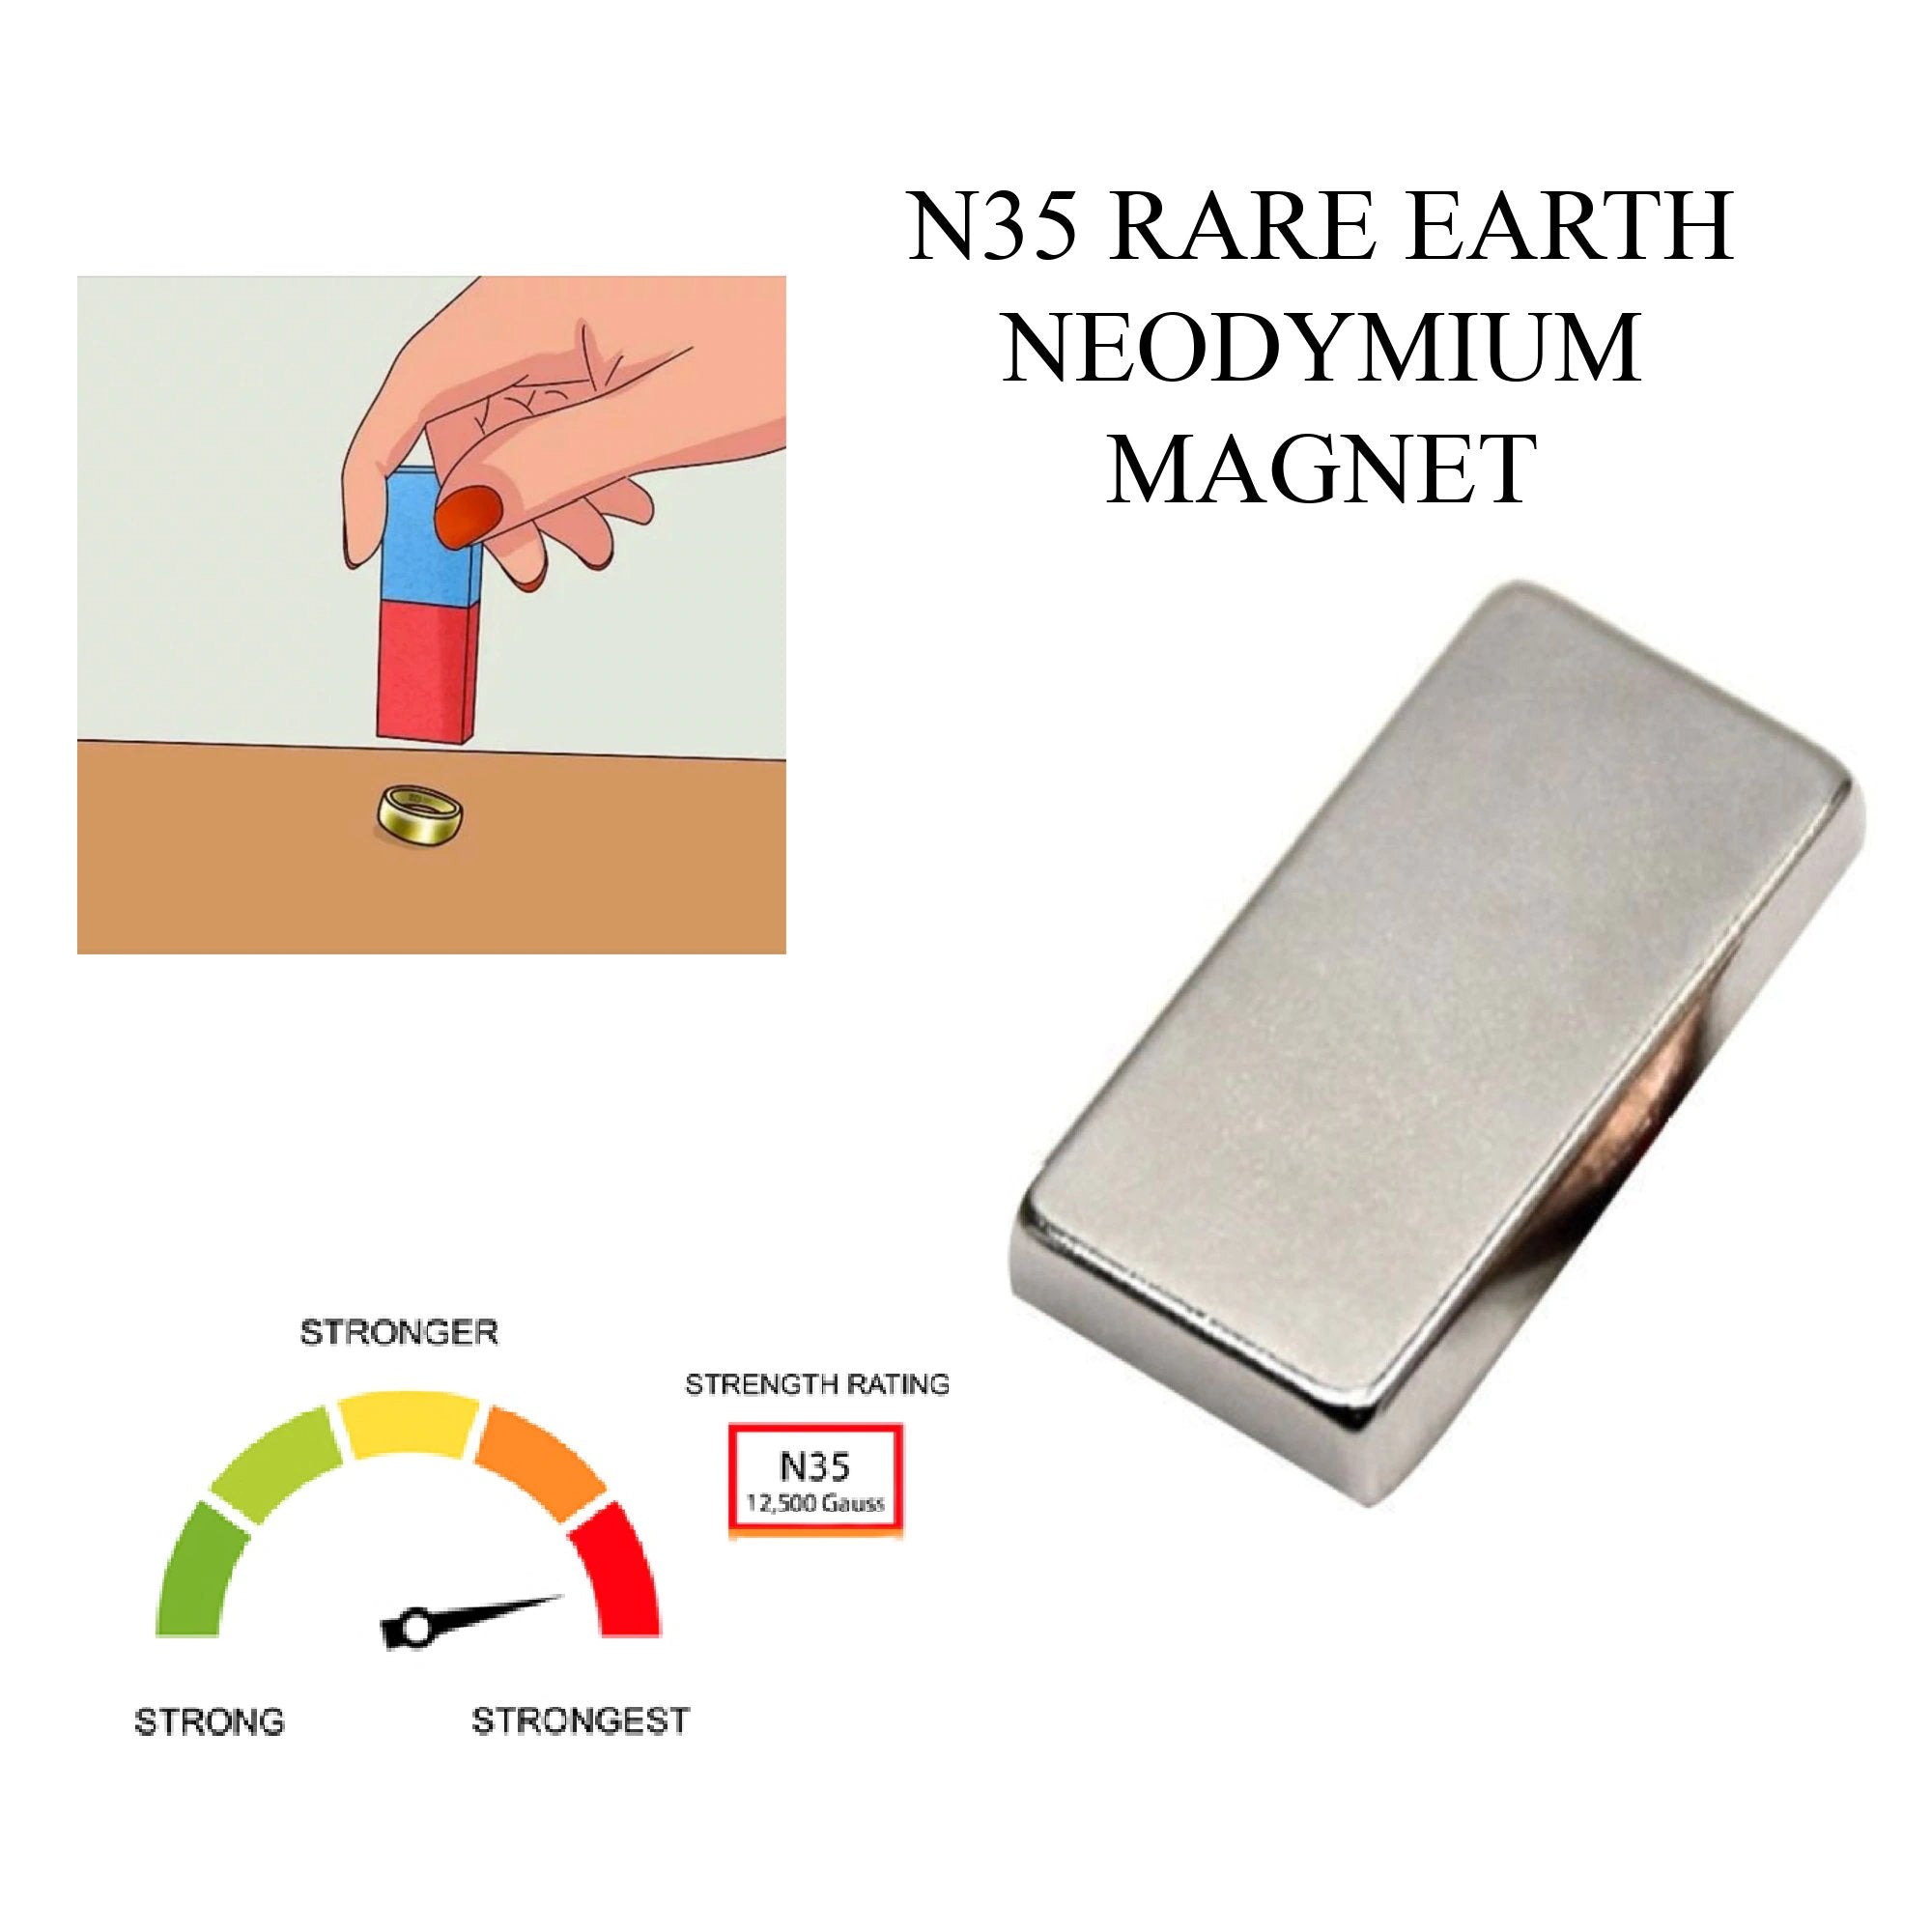 JSP Rare Earth Magnet Neodymium N35 for Precious Metals Gold Jewelry Testing Scrap Bars Fake Coins Tester 999 Ring, Women's, Size: One size, Grey Type